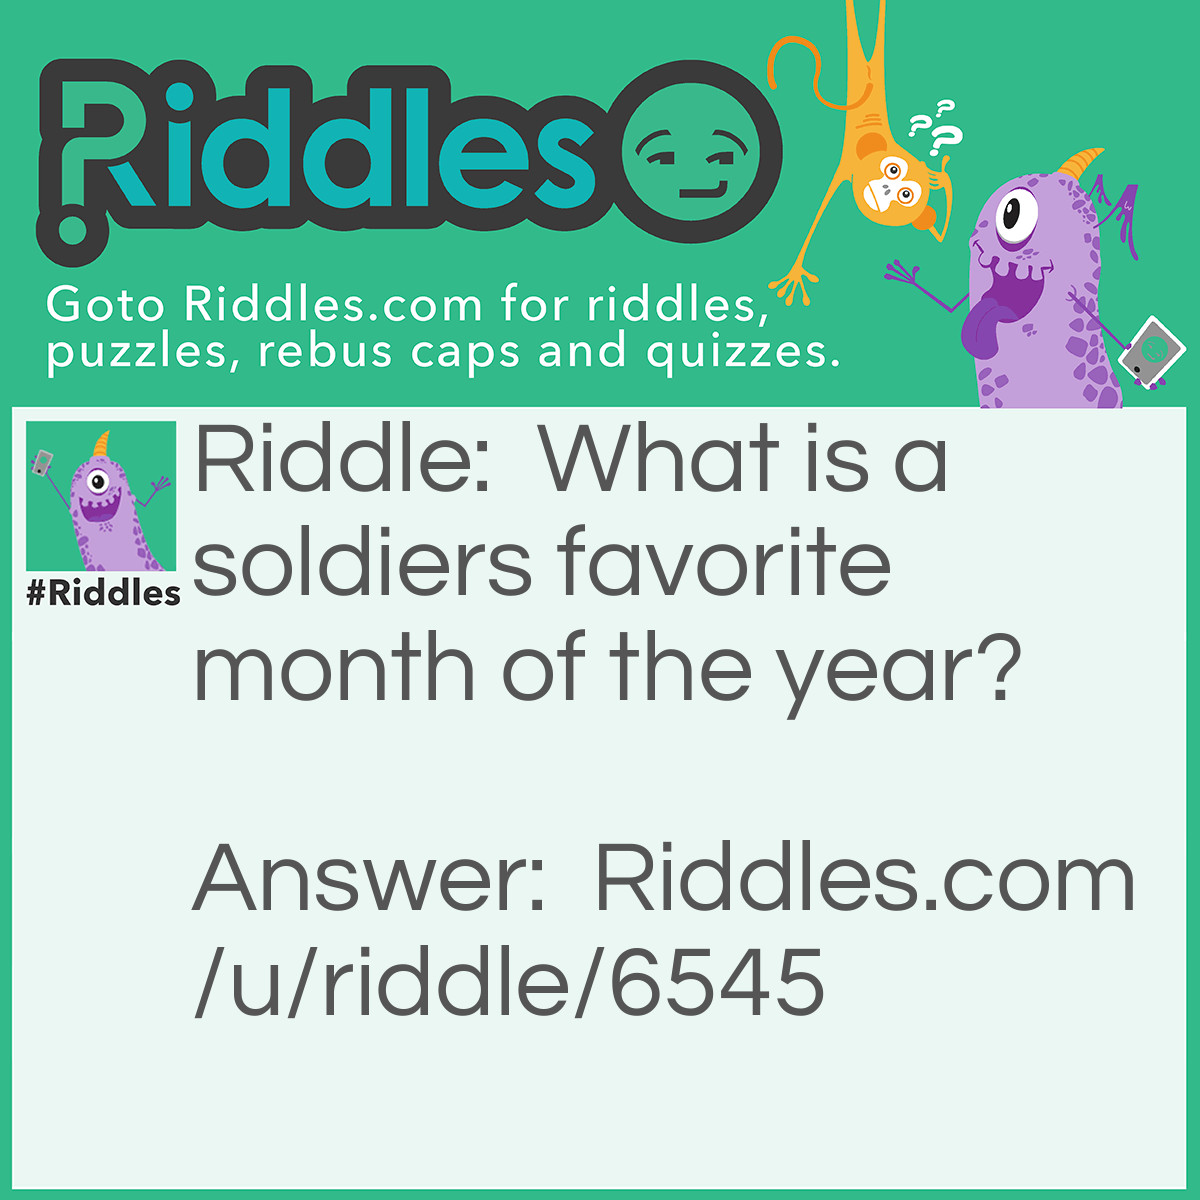 Riddle: What is a soldiers favorite month of the year? Answer: March!